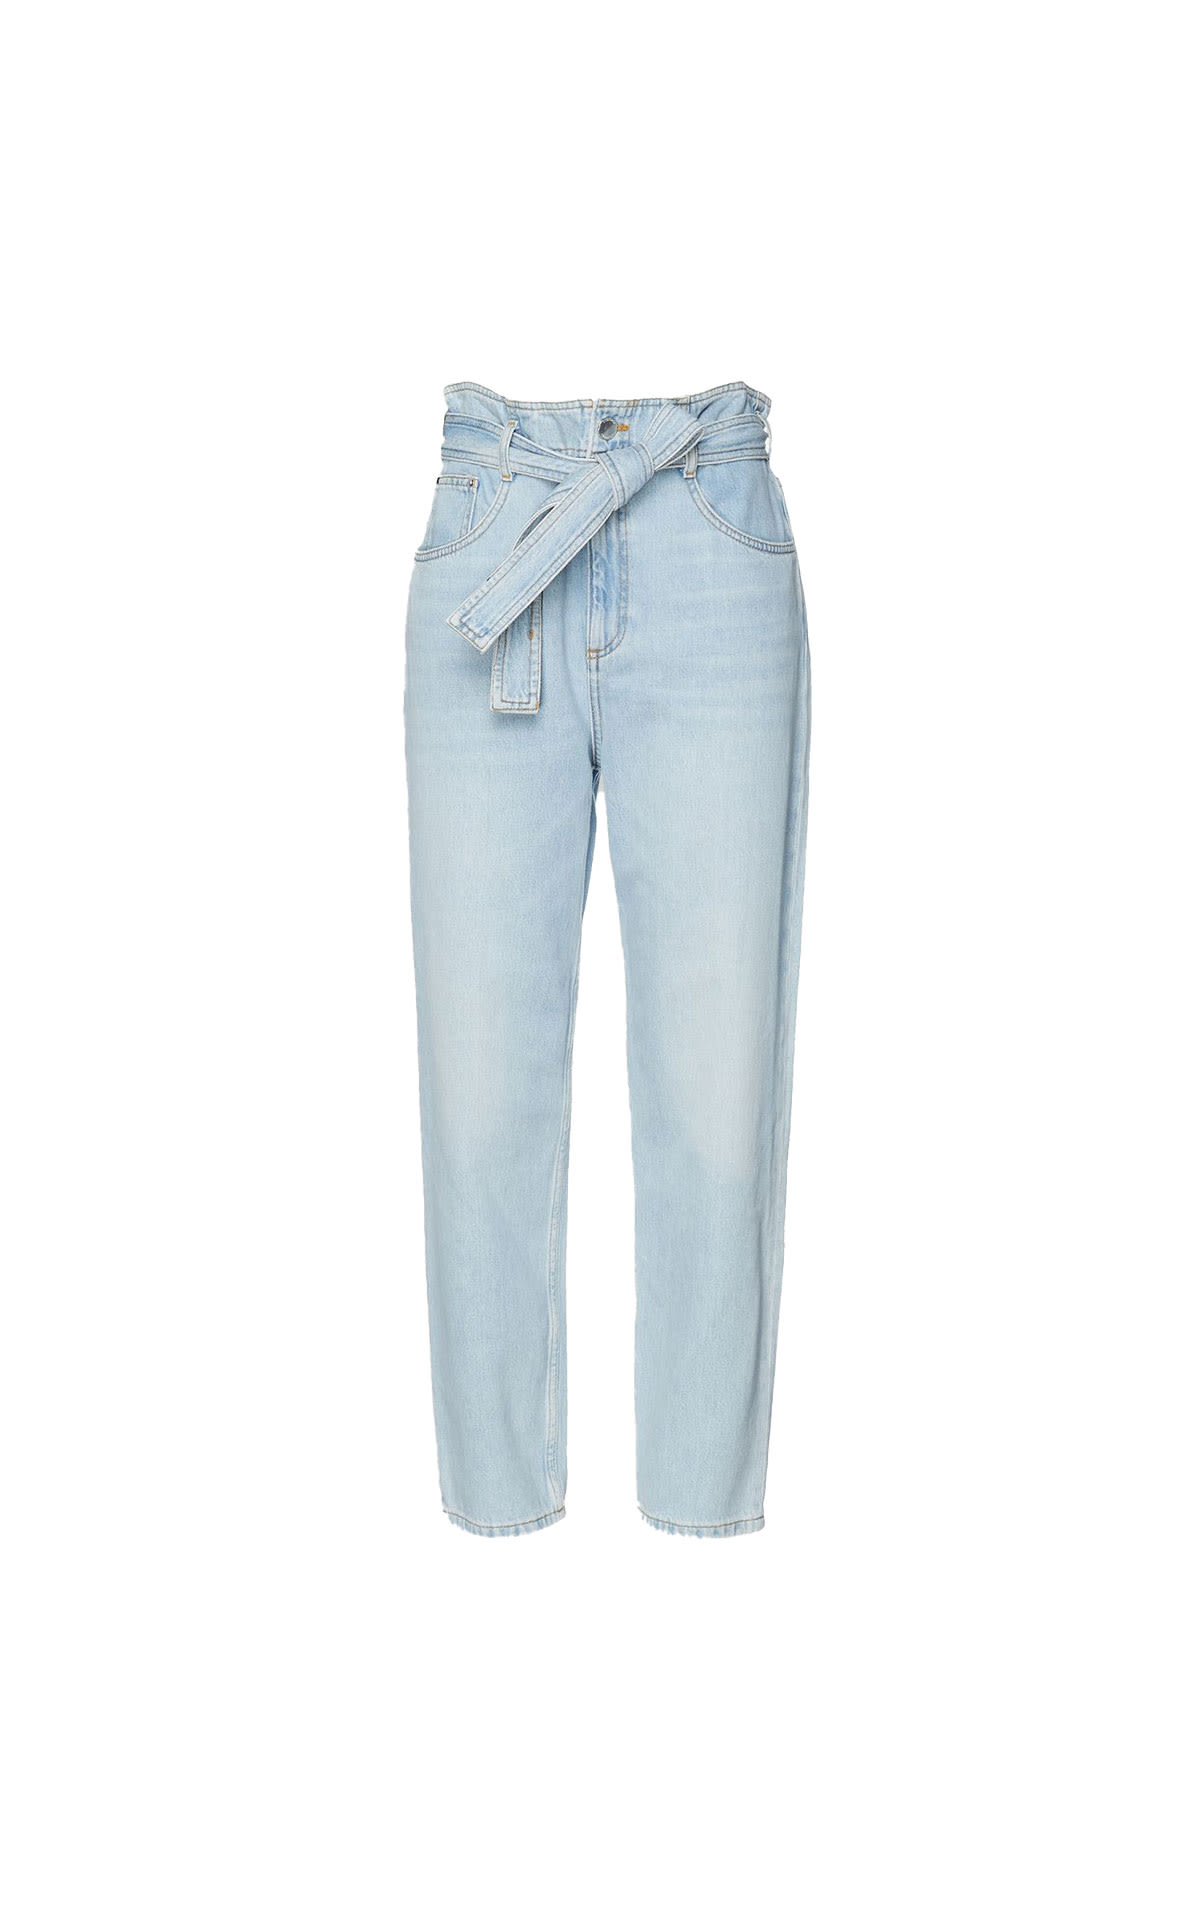 Claudie Pierlot Belted cotton Jeans from Bicester Village